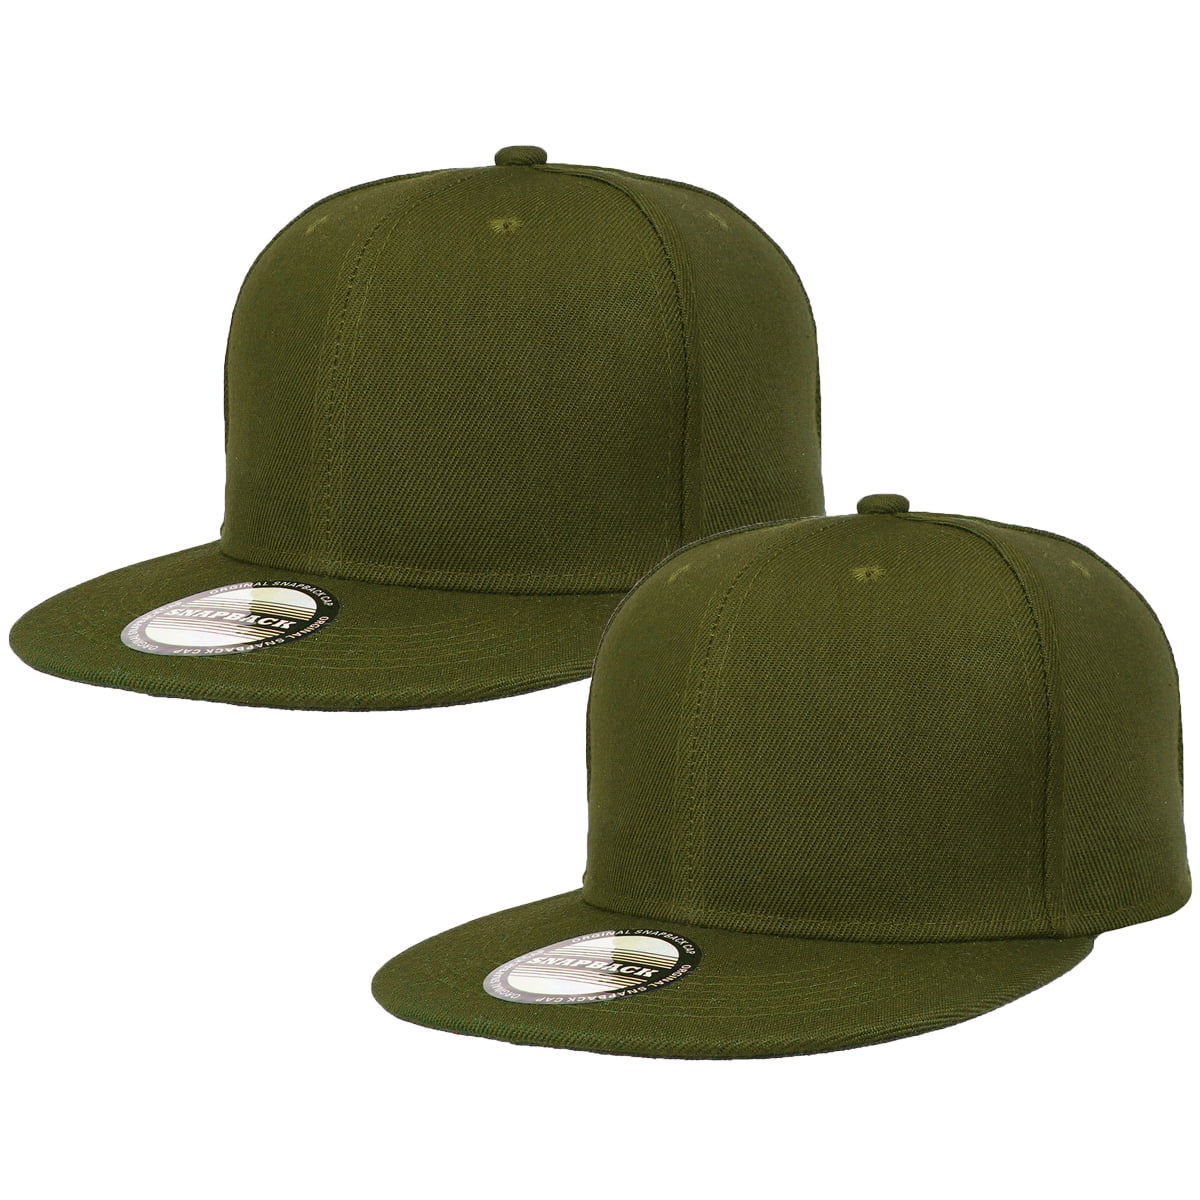 2-pack Classic Snapback Hat Cap Hip Hop Style Flat Bill Blank Solid Color Adjustable Size Army Green & Army Green